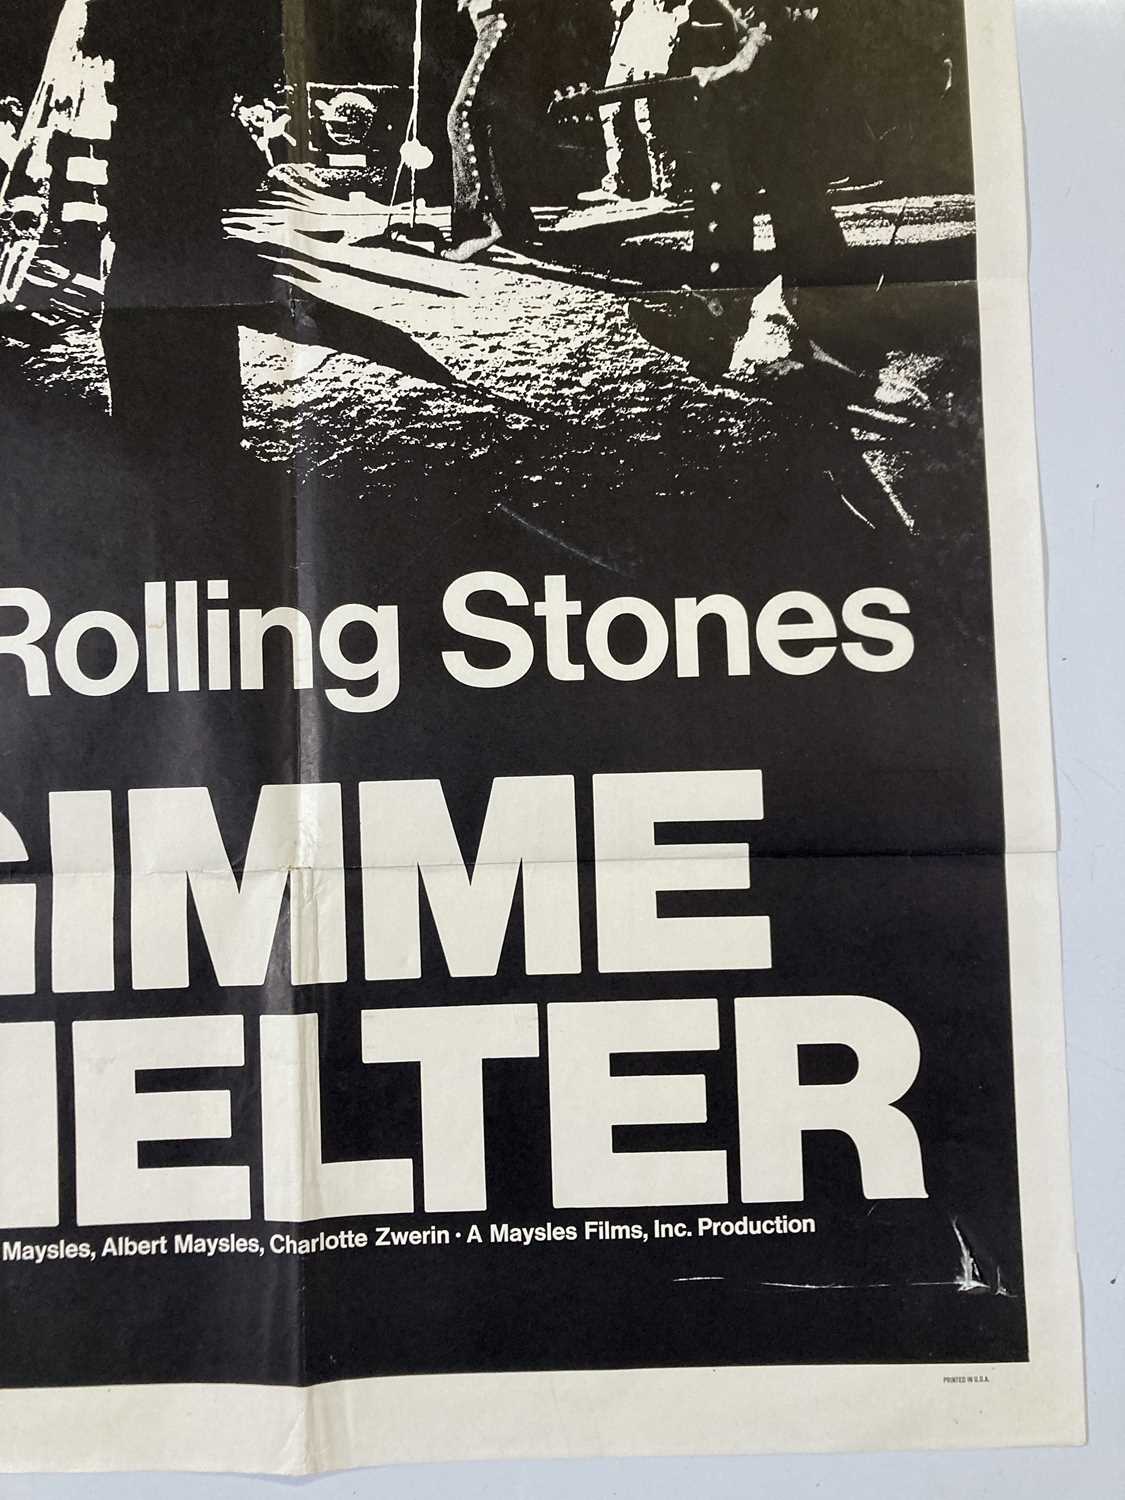 THE ROLLING STONES - GIMME SHELTER (1970) ORIGINAL US ONE-SHEET POSTER. - Image 3 of 8